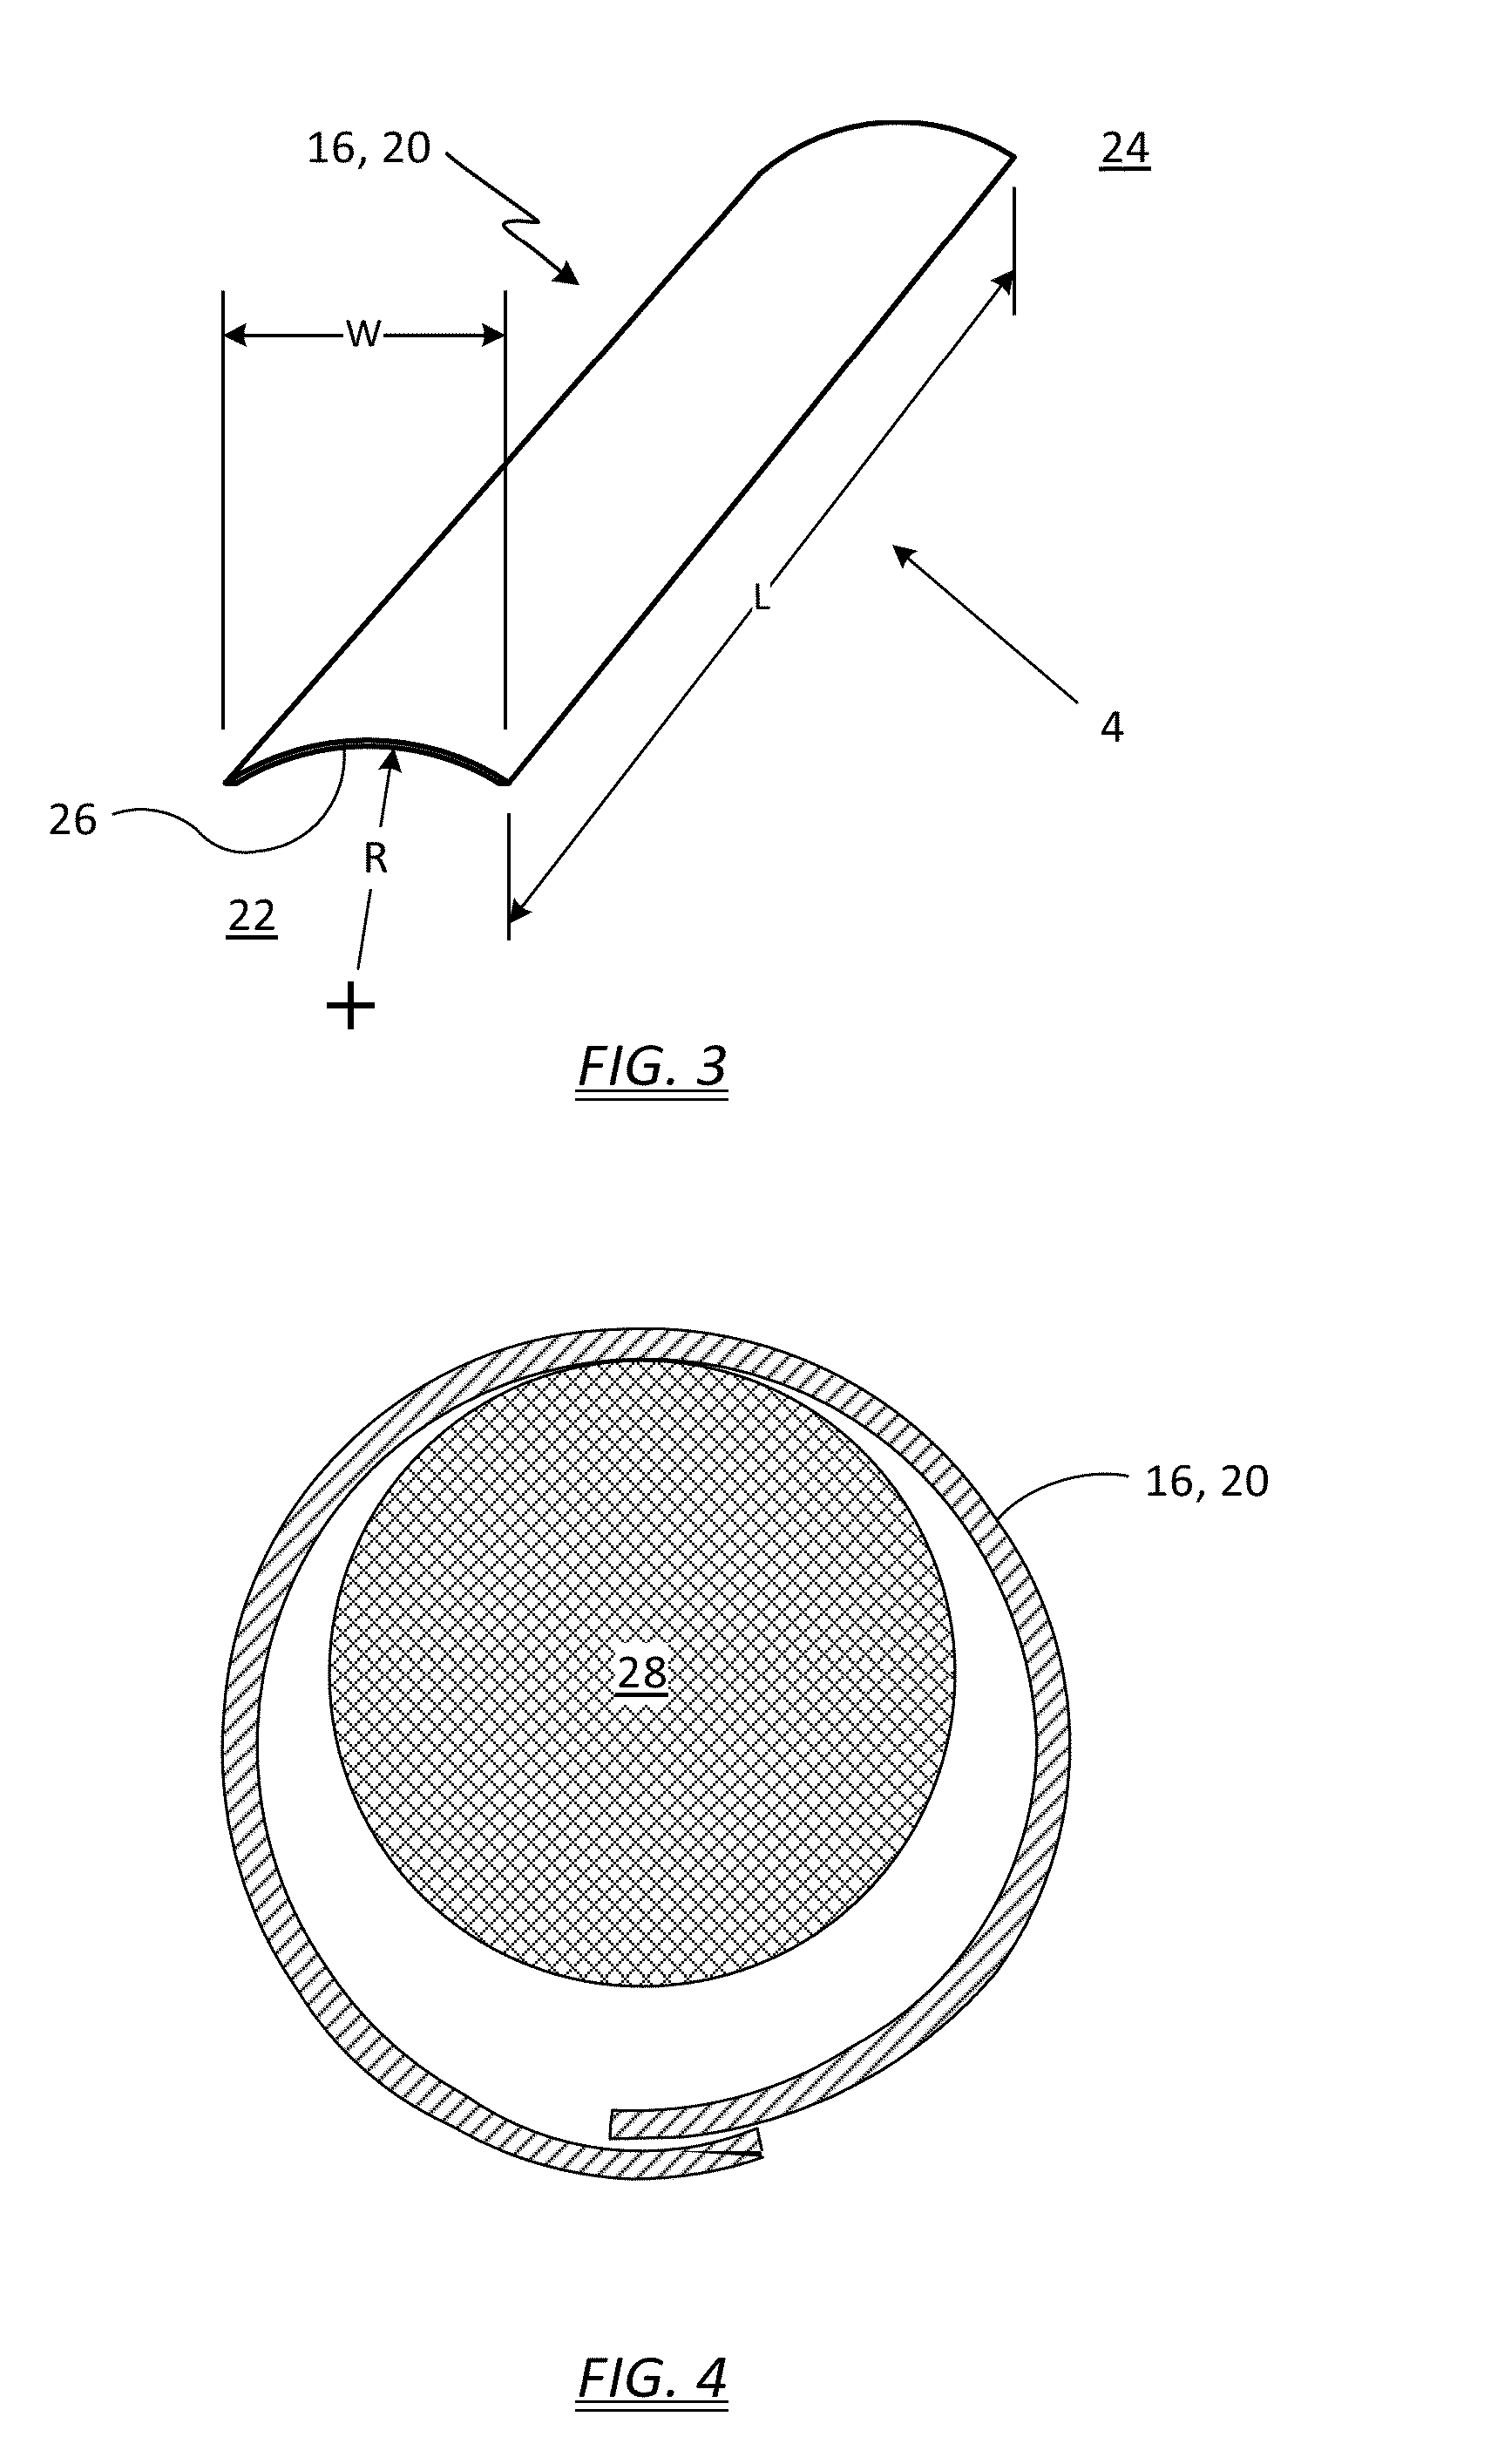 Spring-actuated appendage for stuffed animal and method for use